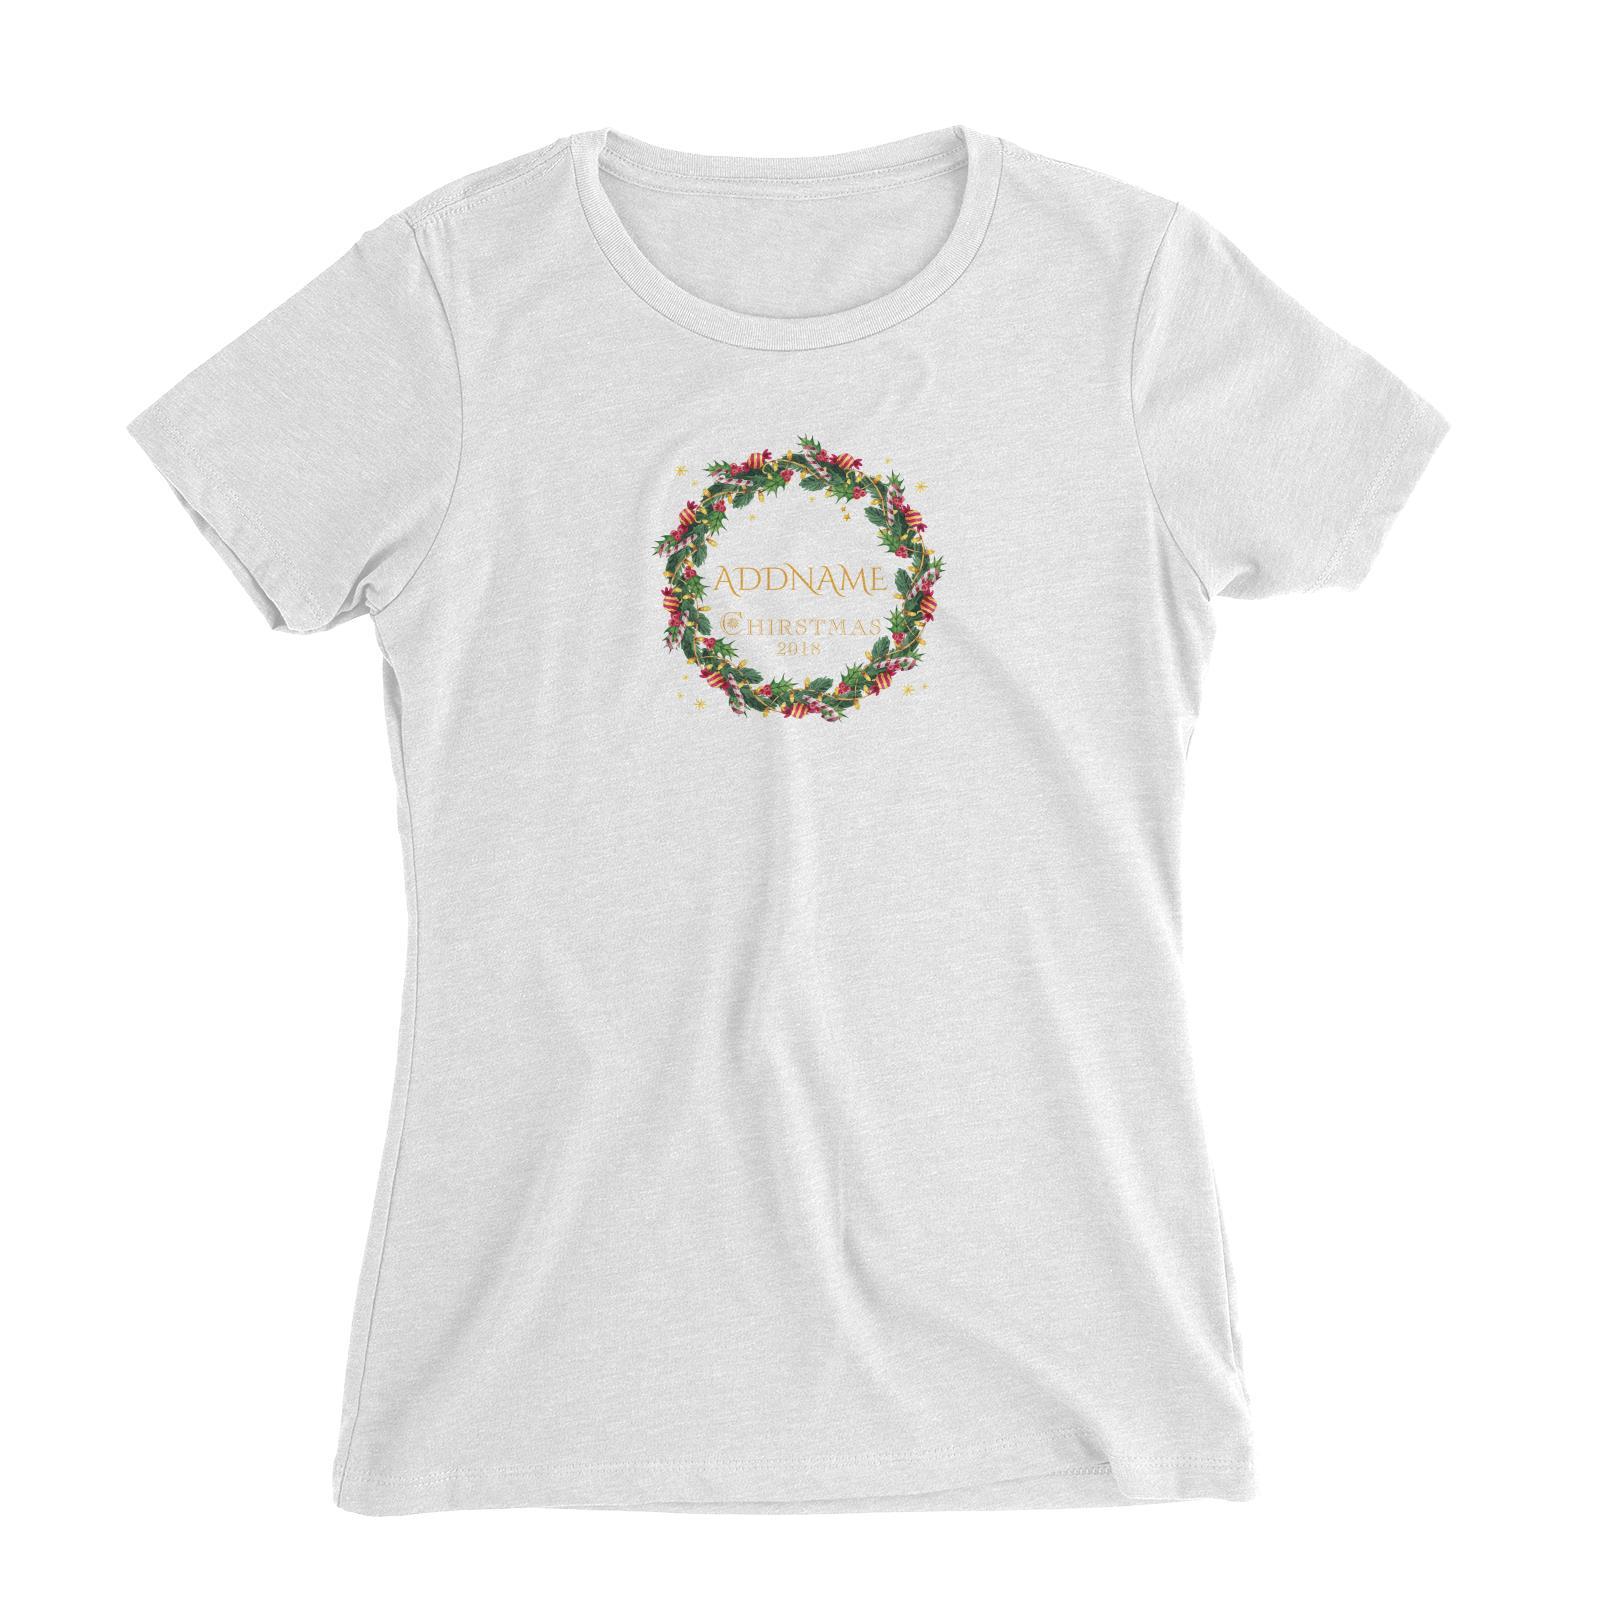 Christmas Watercolour Wreath With Candy 2018 Addname Unisex T-Shirt